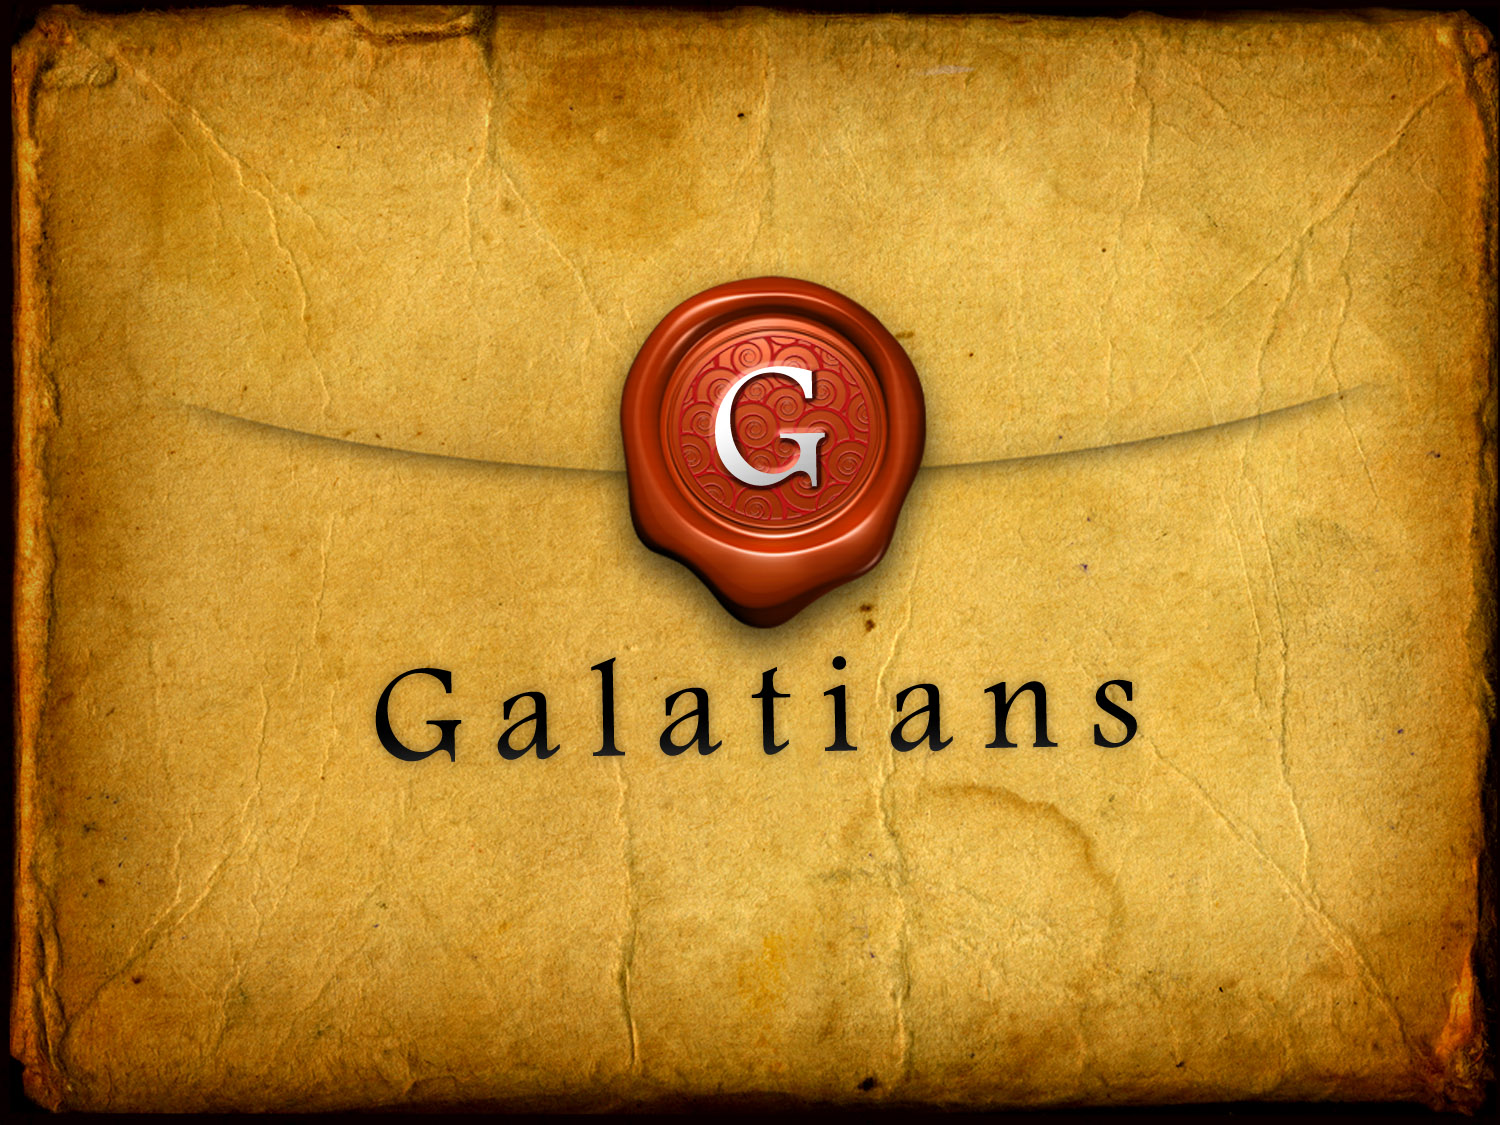 The Book of Galatians 2:17-21